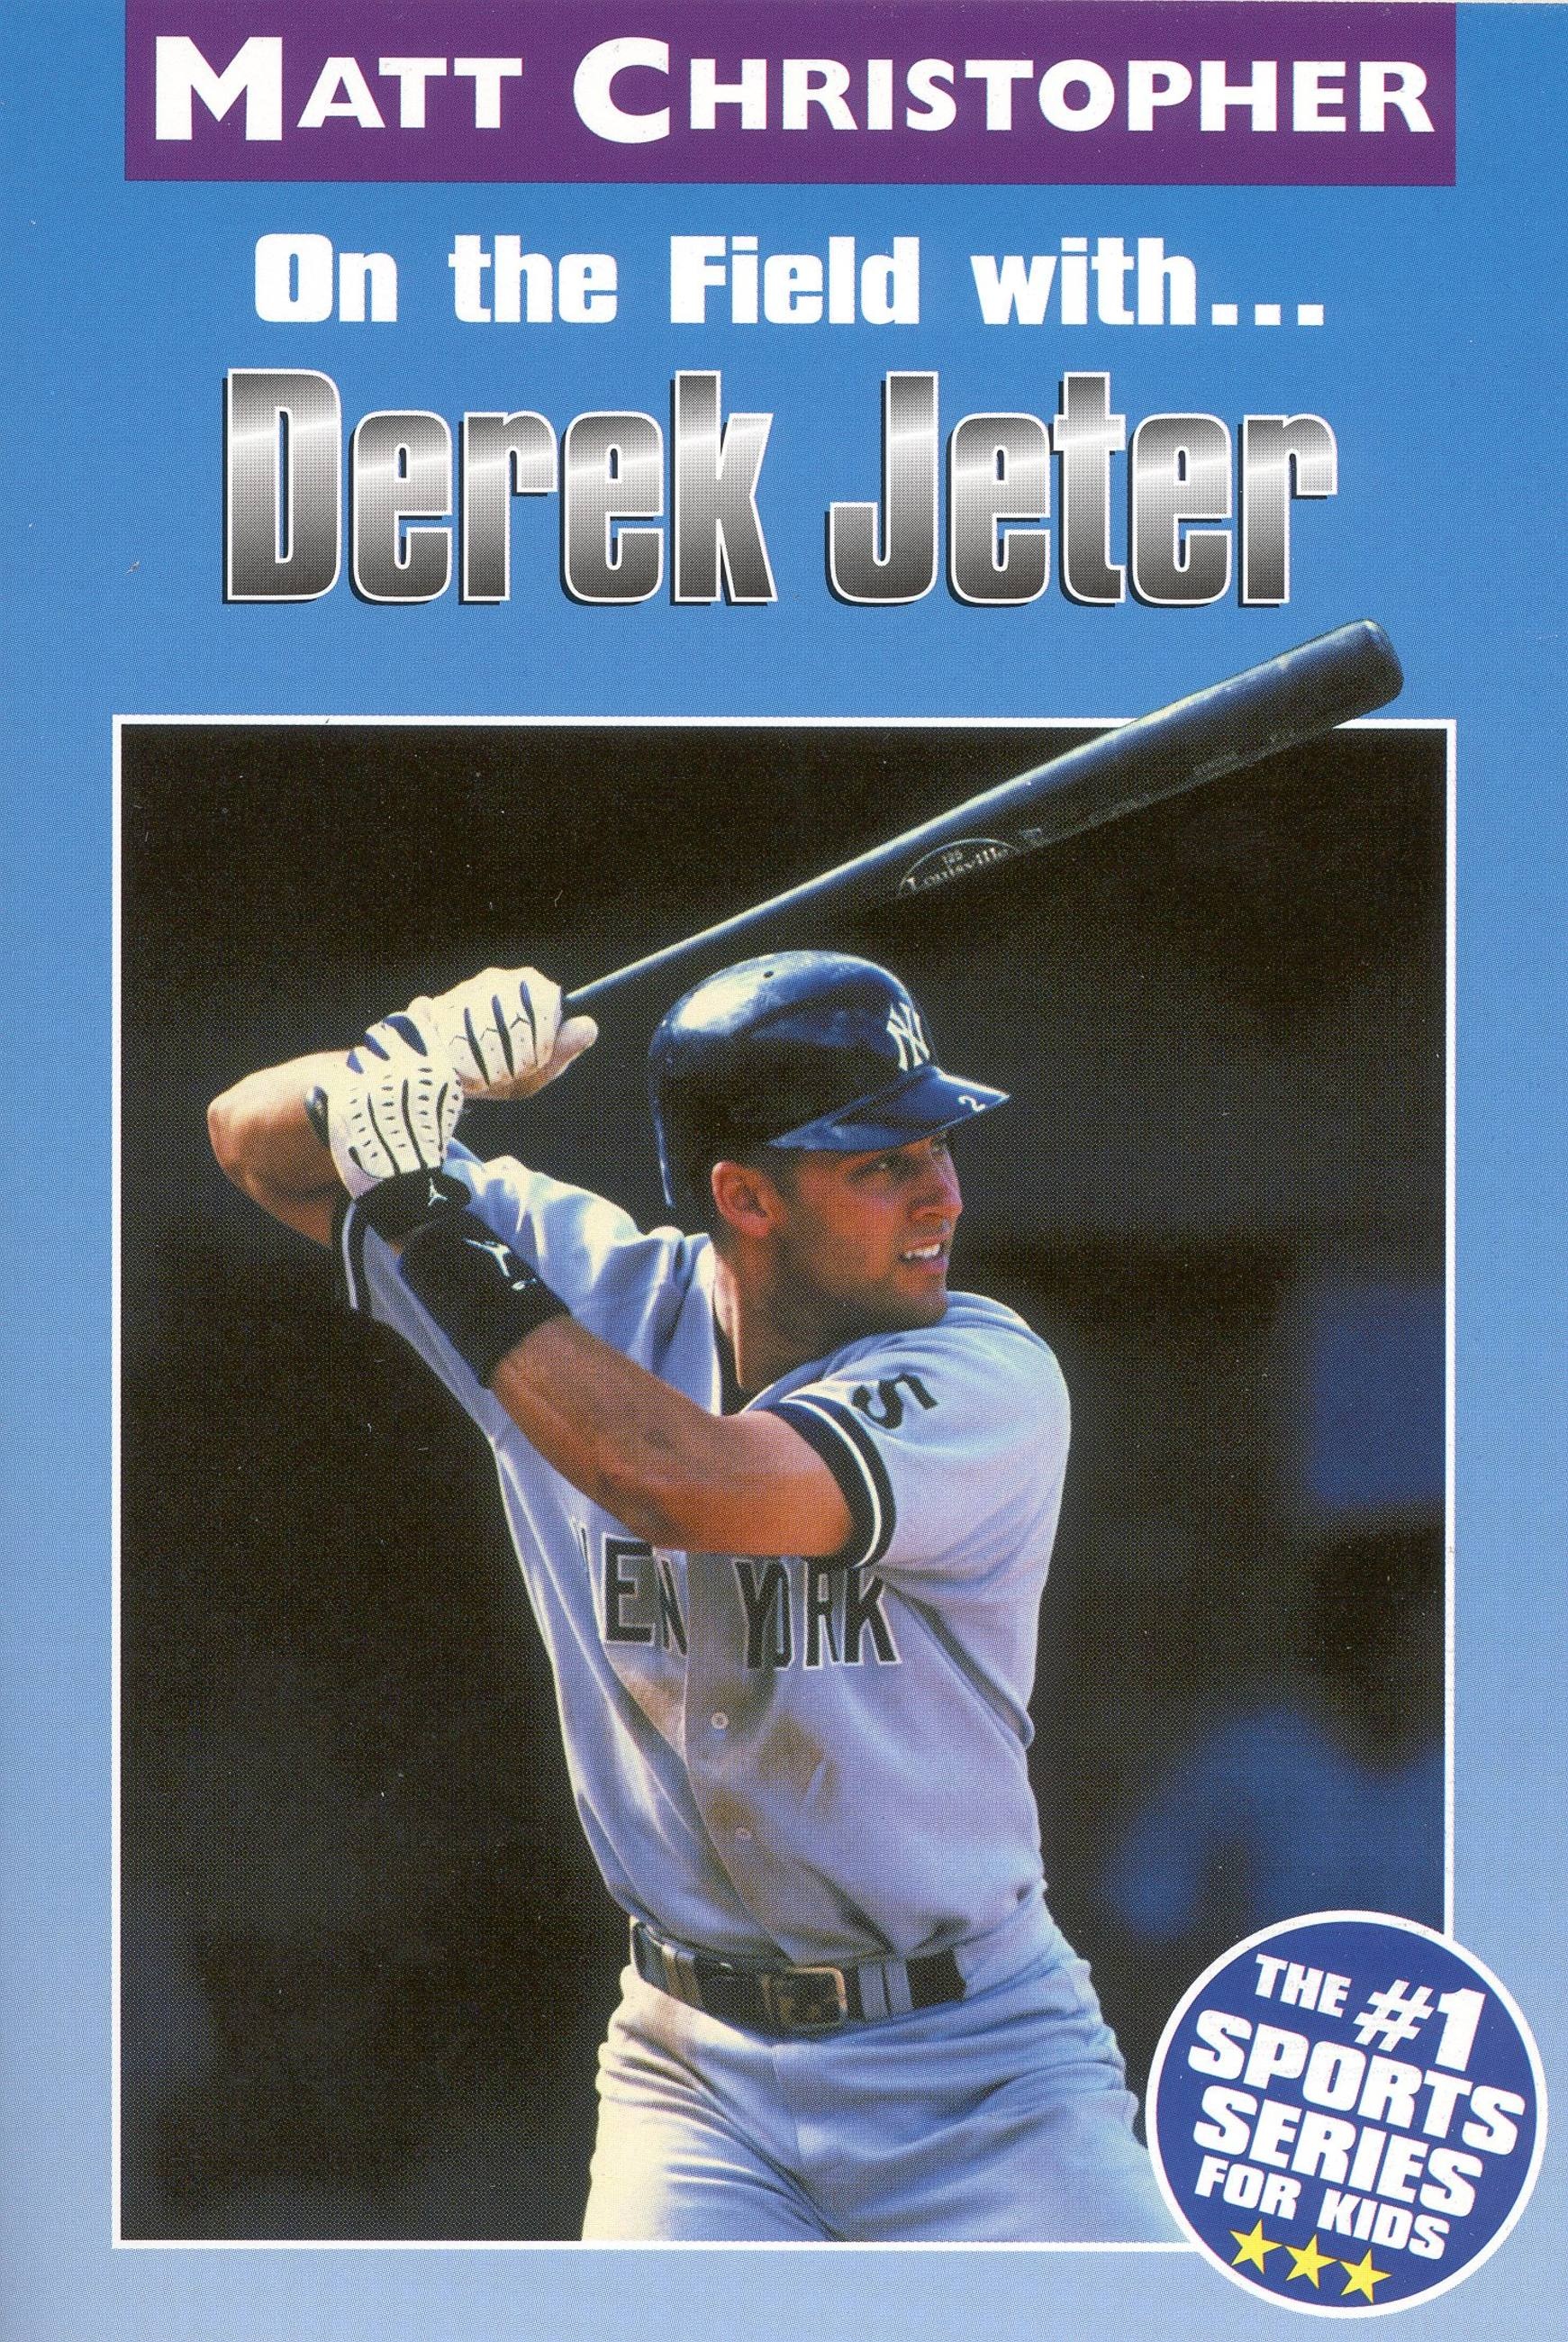 Yes, there really is a Kalamazoo -- just ask Derek Jeter 